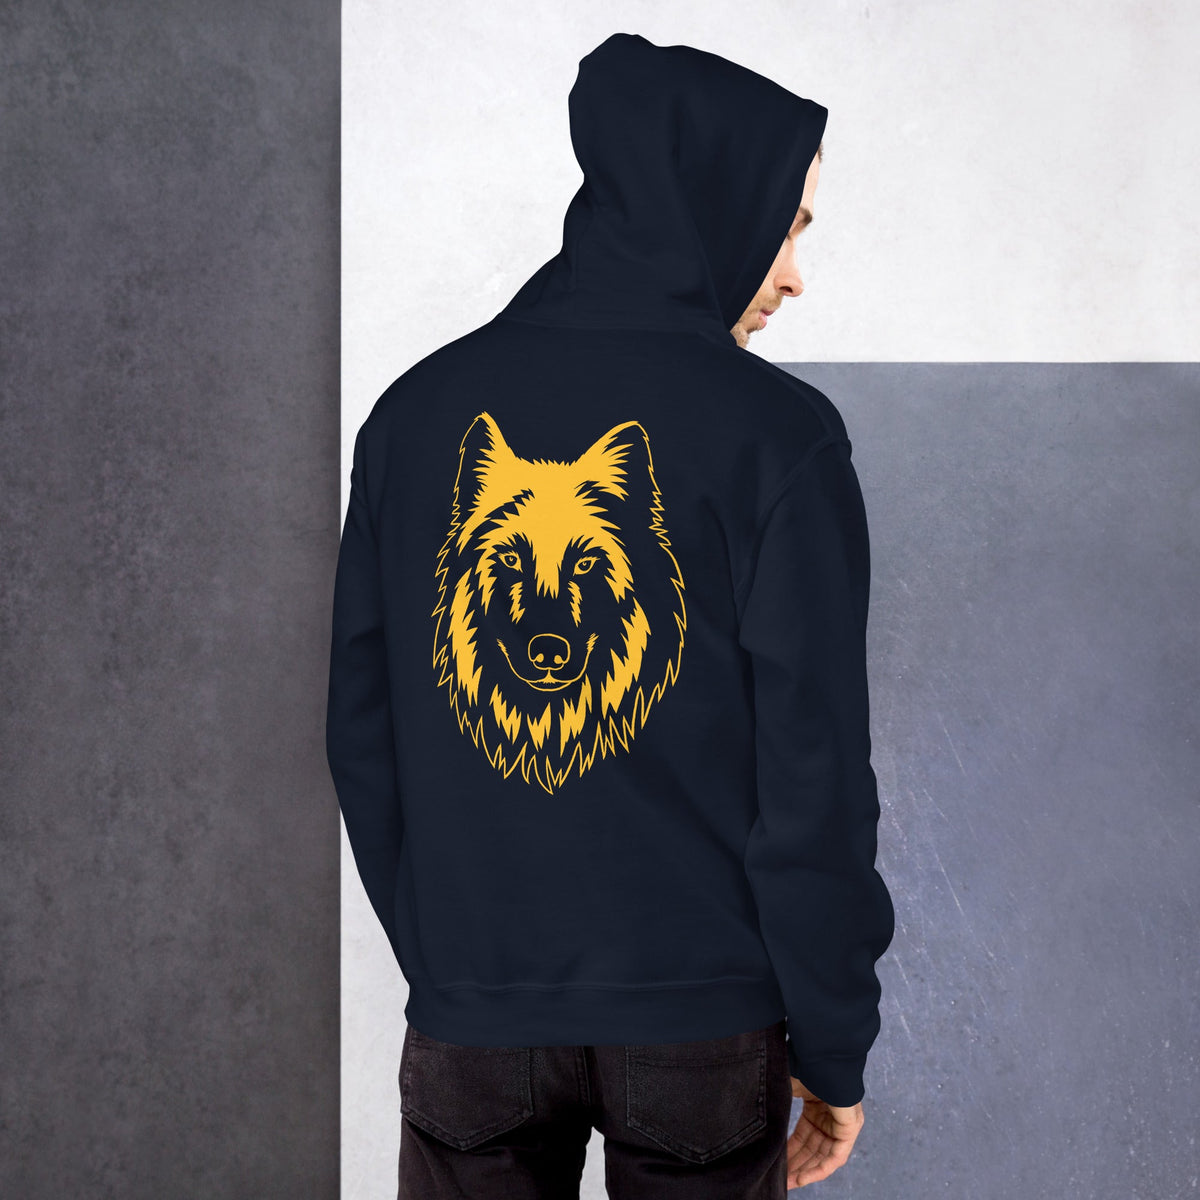 STRONG WOLF I AM FIERCELY ENOUGH - Inspirational Custom Graphic Hoodie for Men